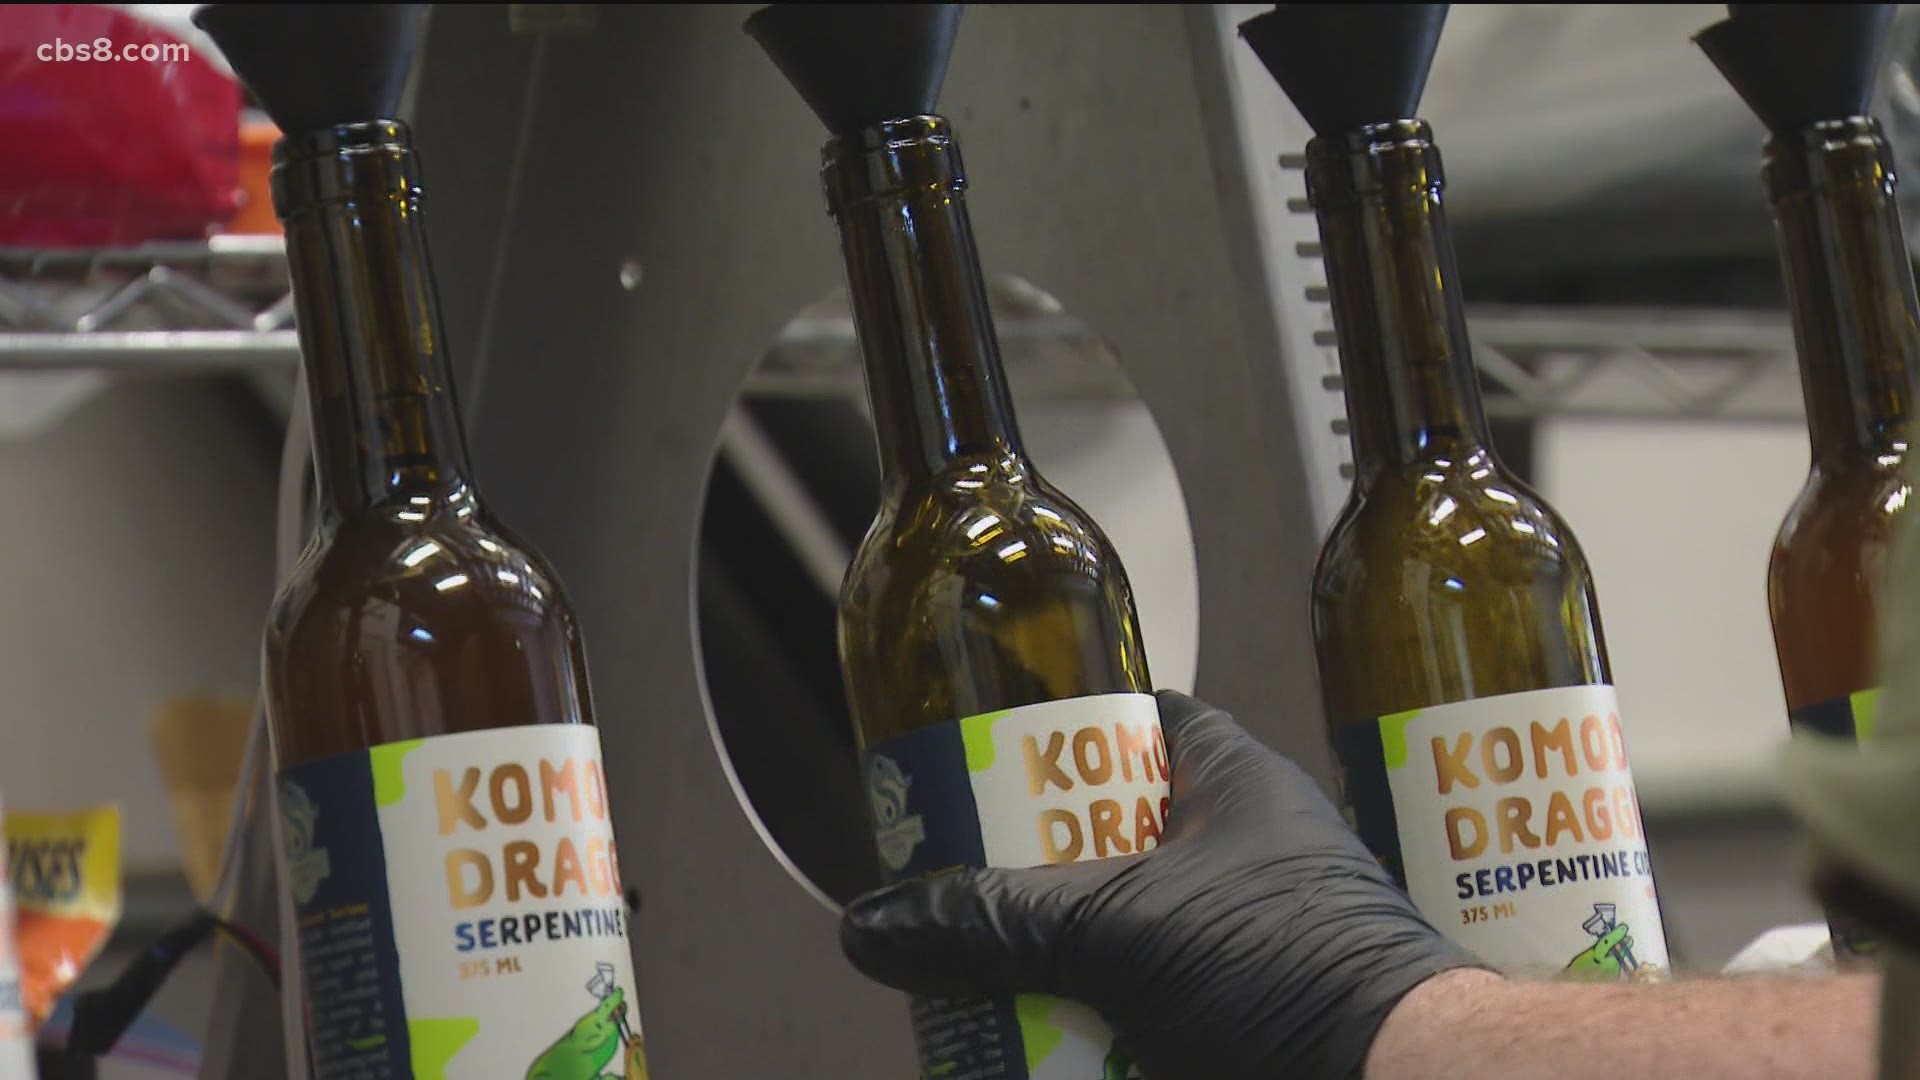 The Serpentine Cider team spent Friday bottling cider, knowing online and to-go orders will be their only option once the stay-at-home order takes effect.